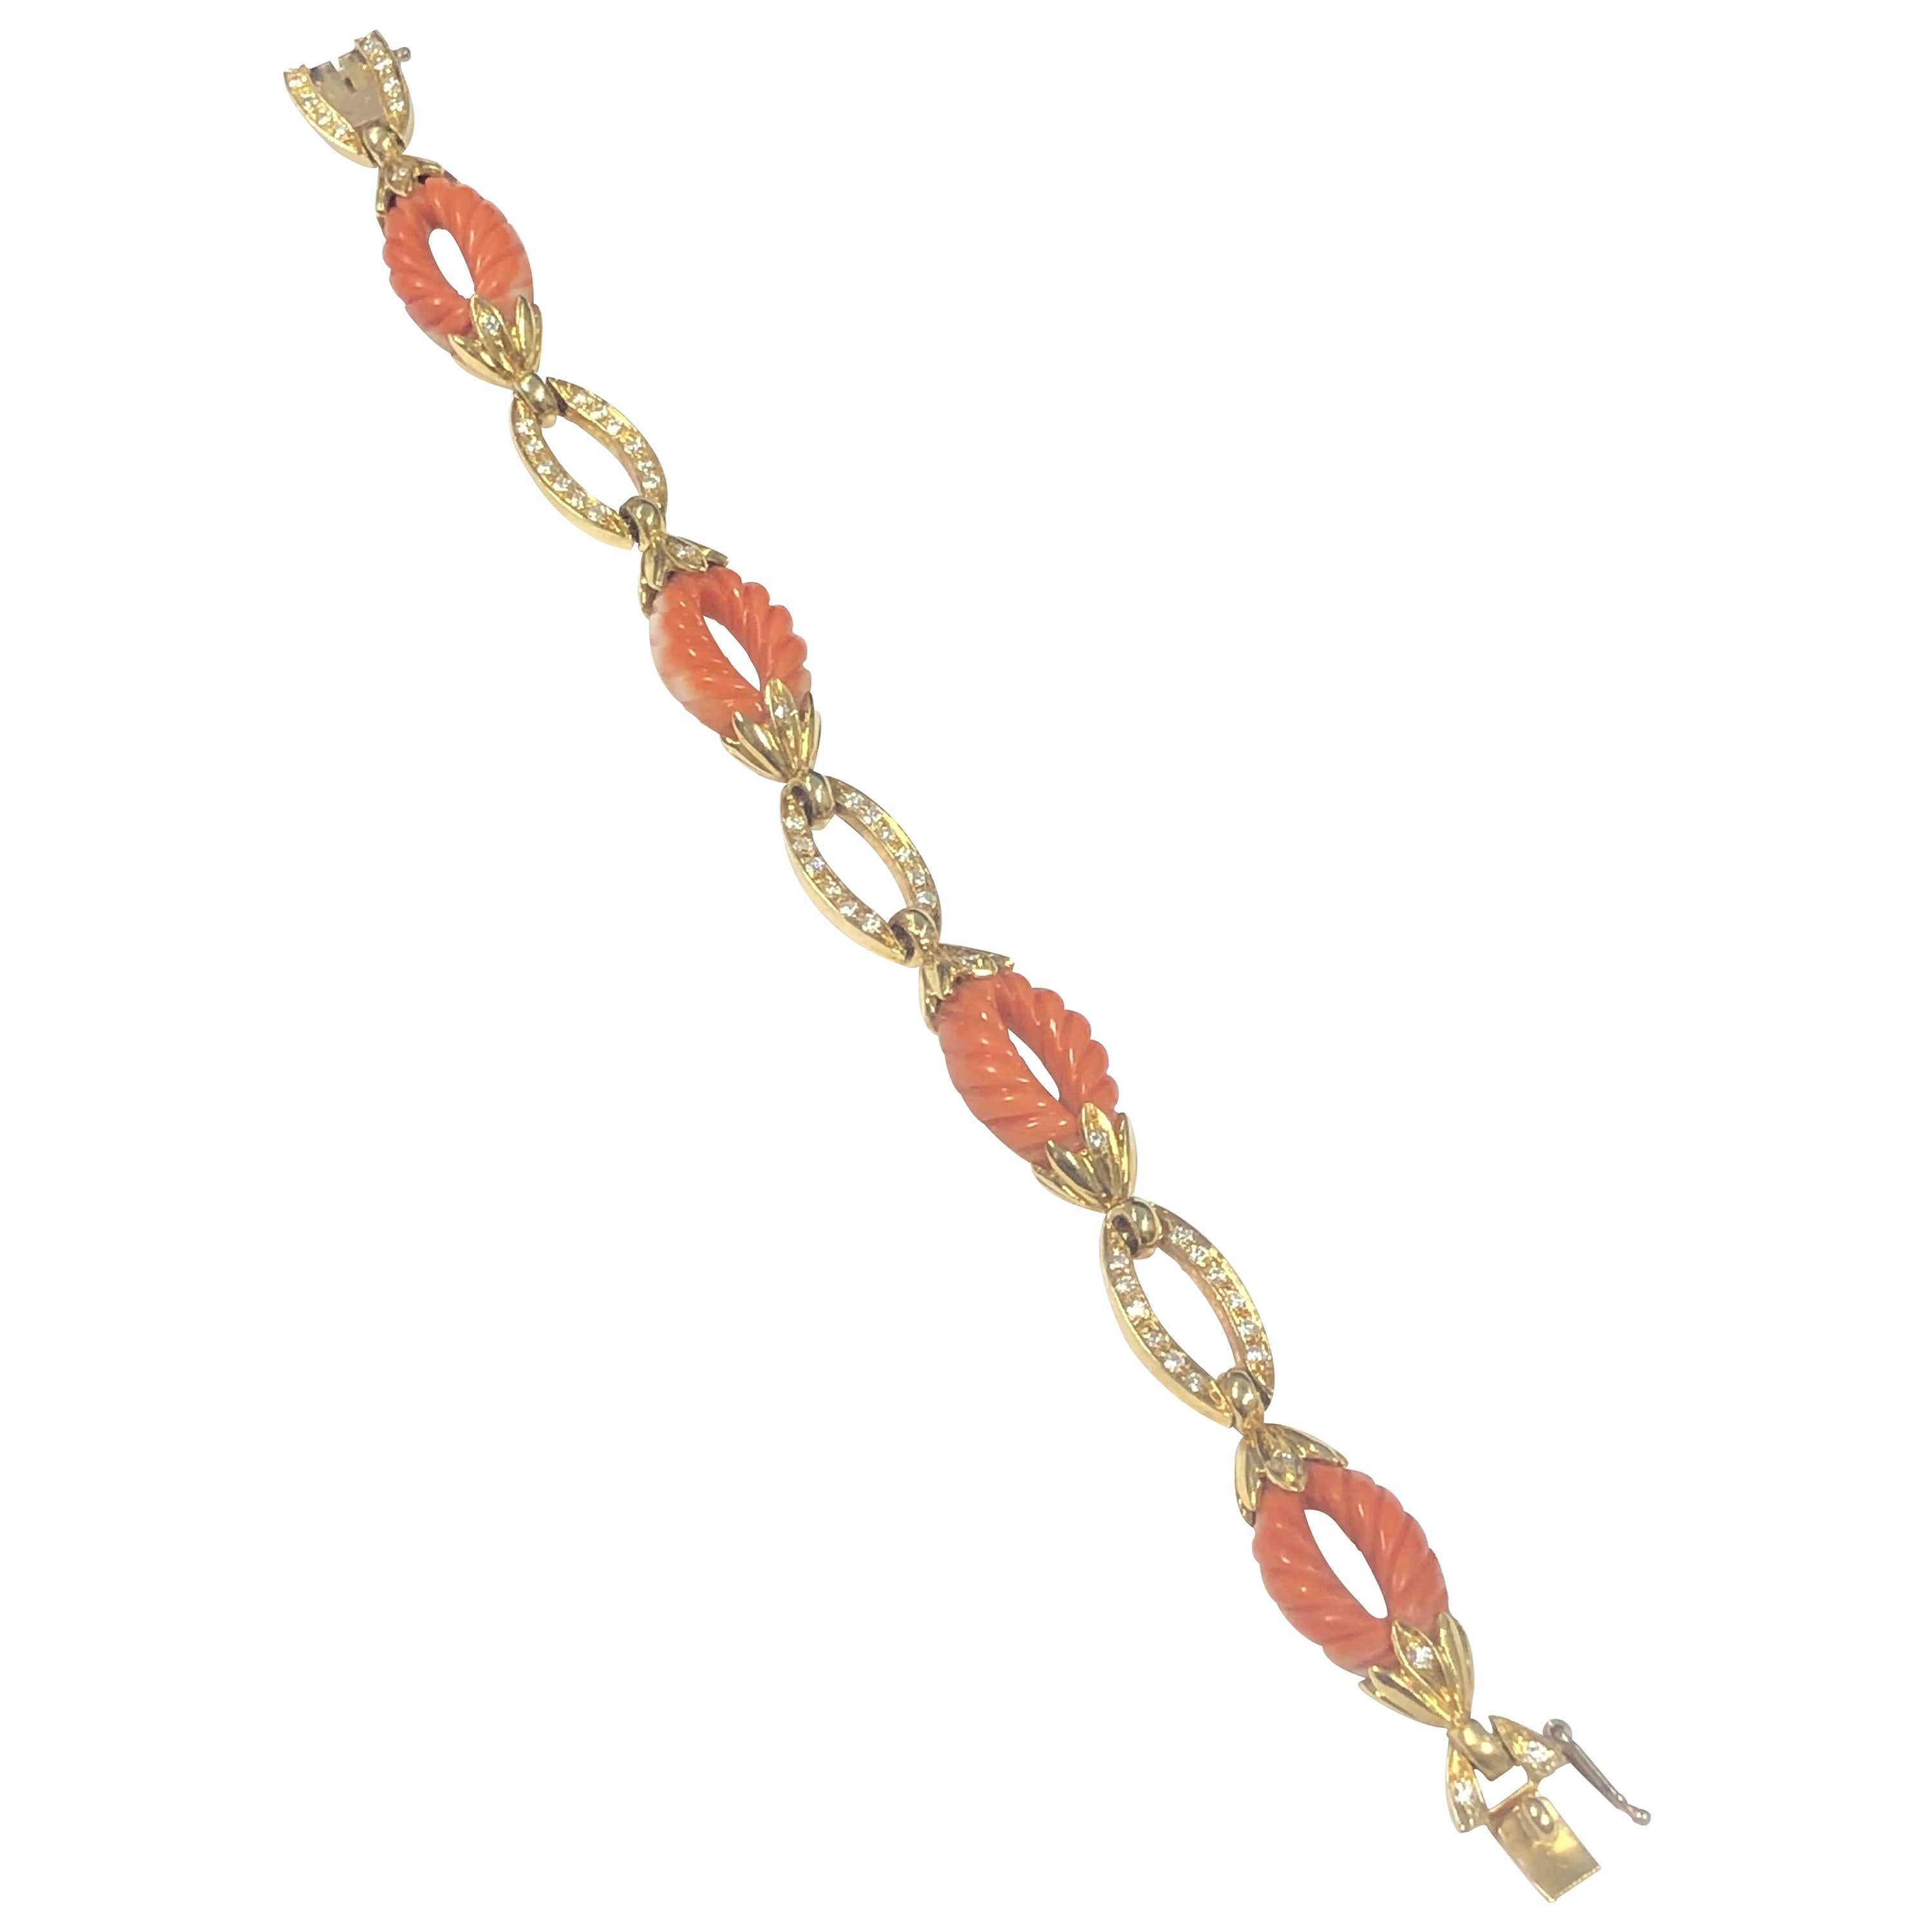 1970s Yellow Gold Diamond and Coral Bracelet